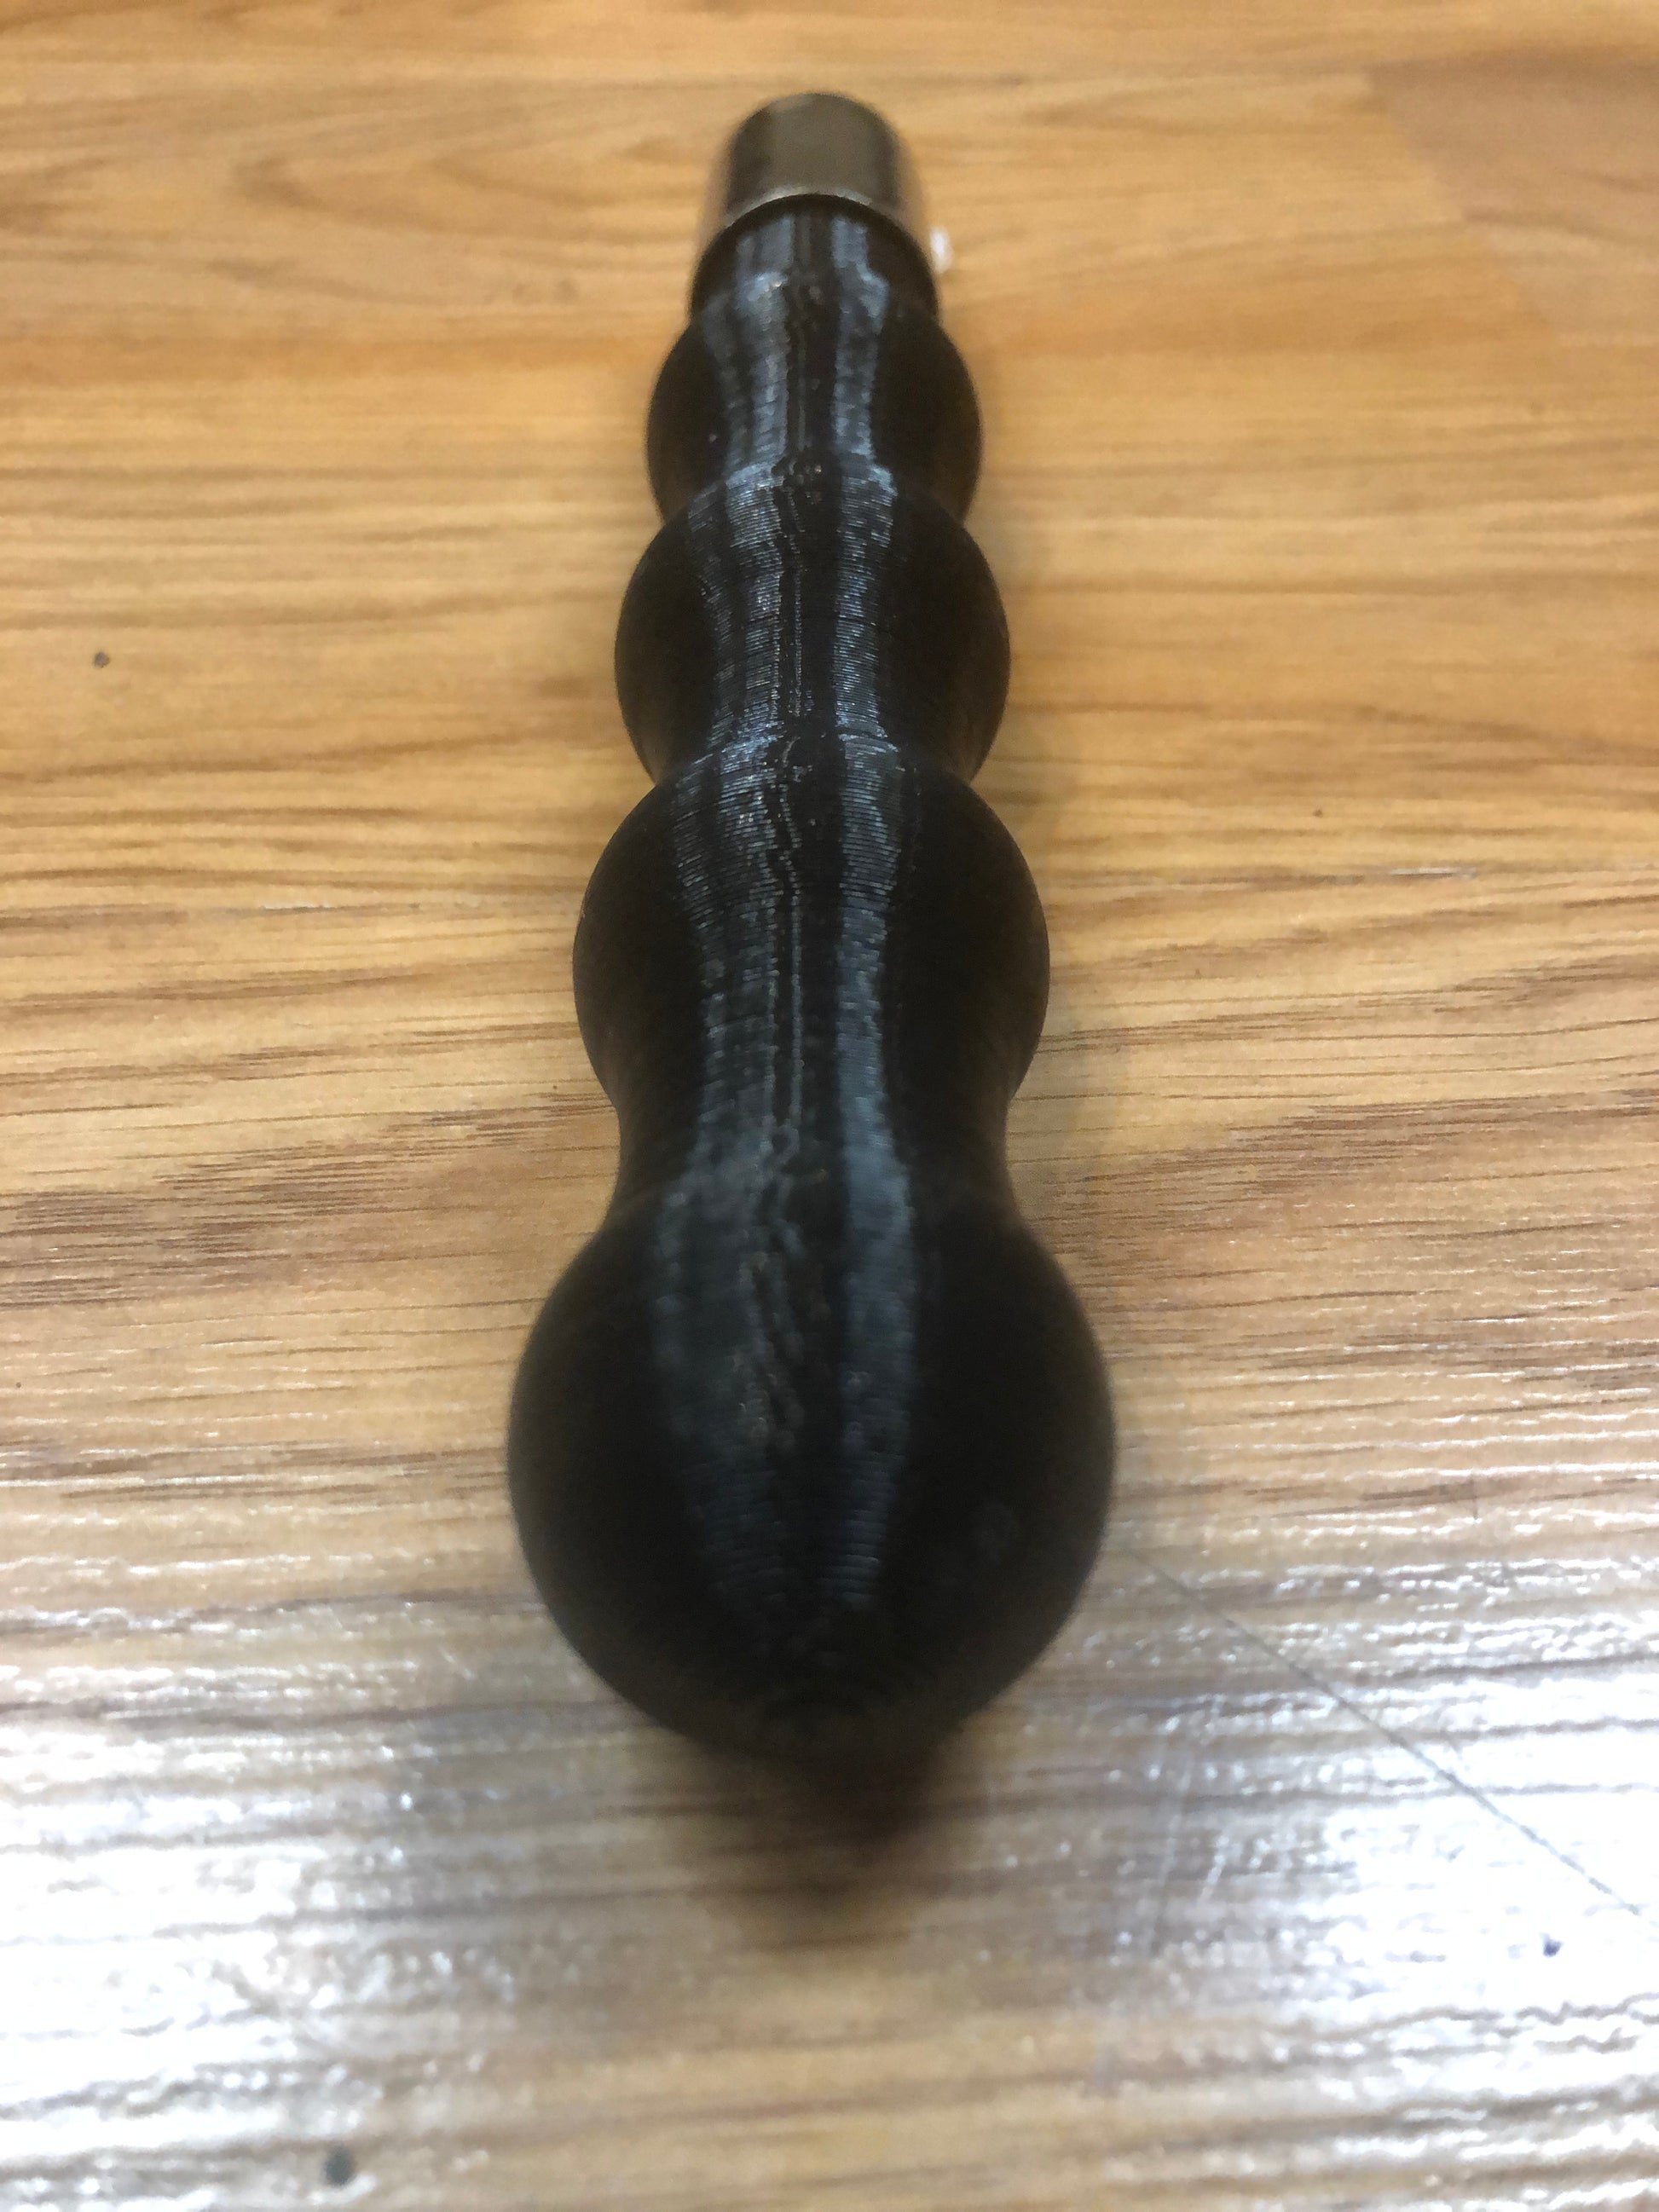 The butt end of the Flogger Handle.